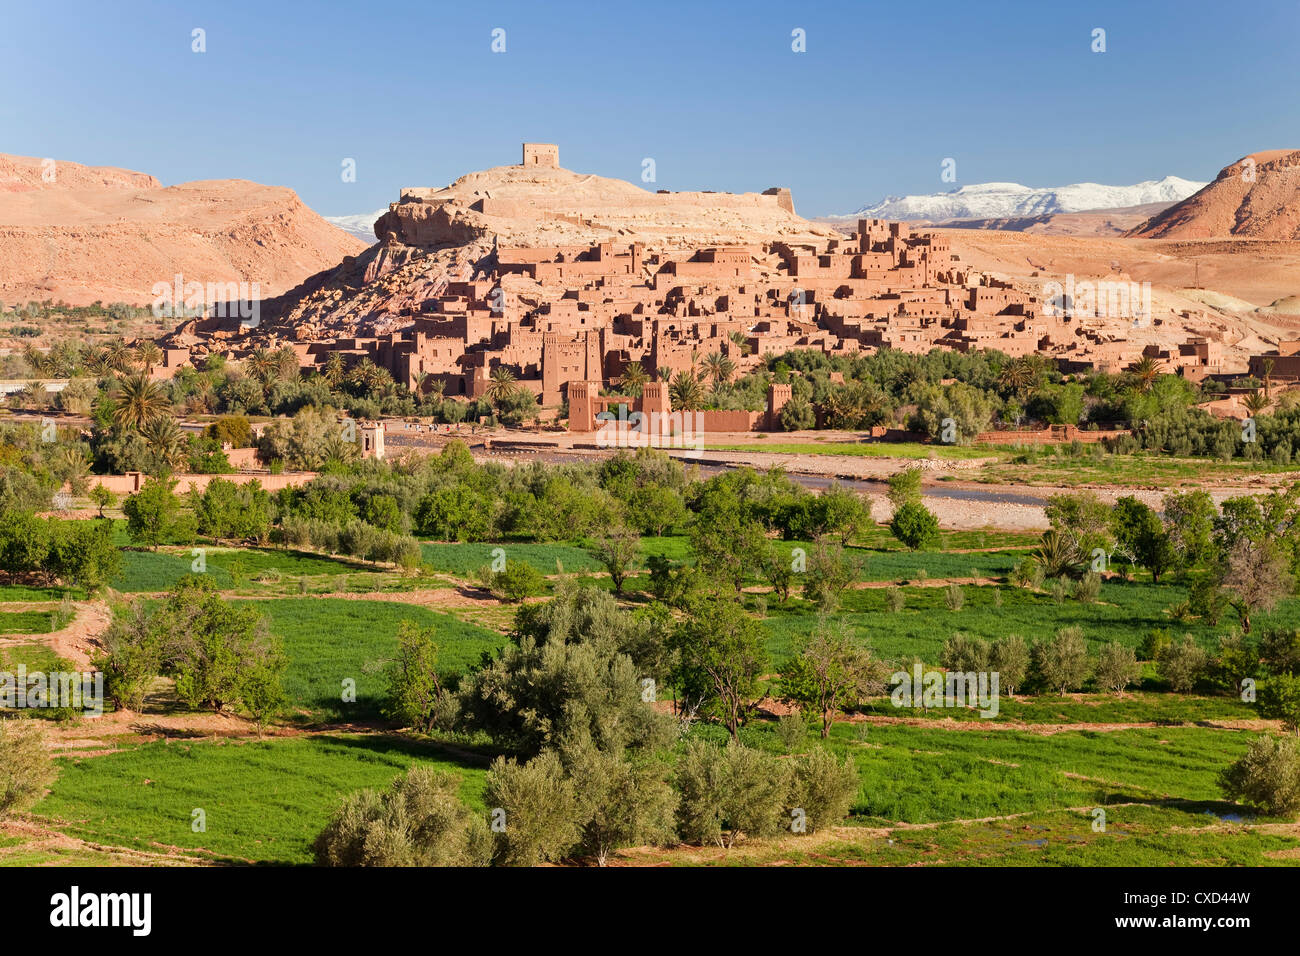 Town of Ait Benhaddou on a former Caravan Route beside the Ouarzazate River, often used as a film location, Morocco Stock Photo